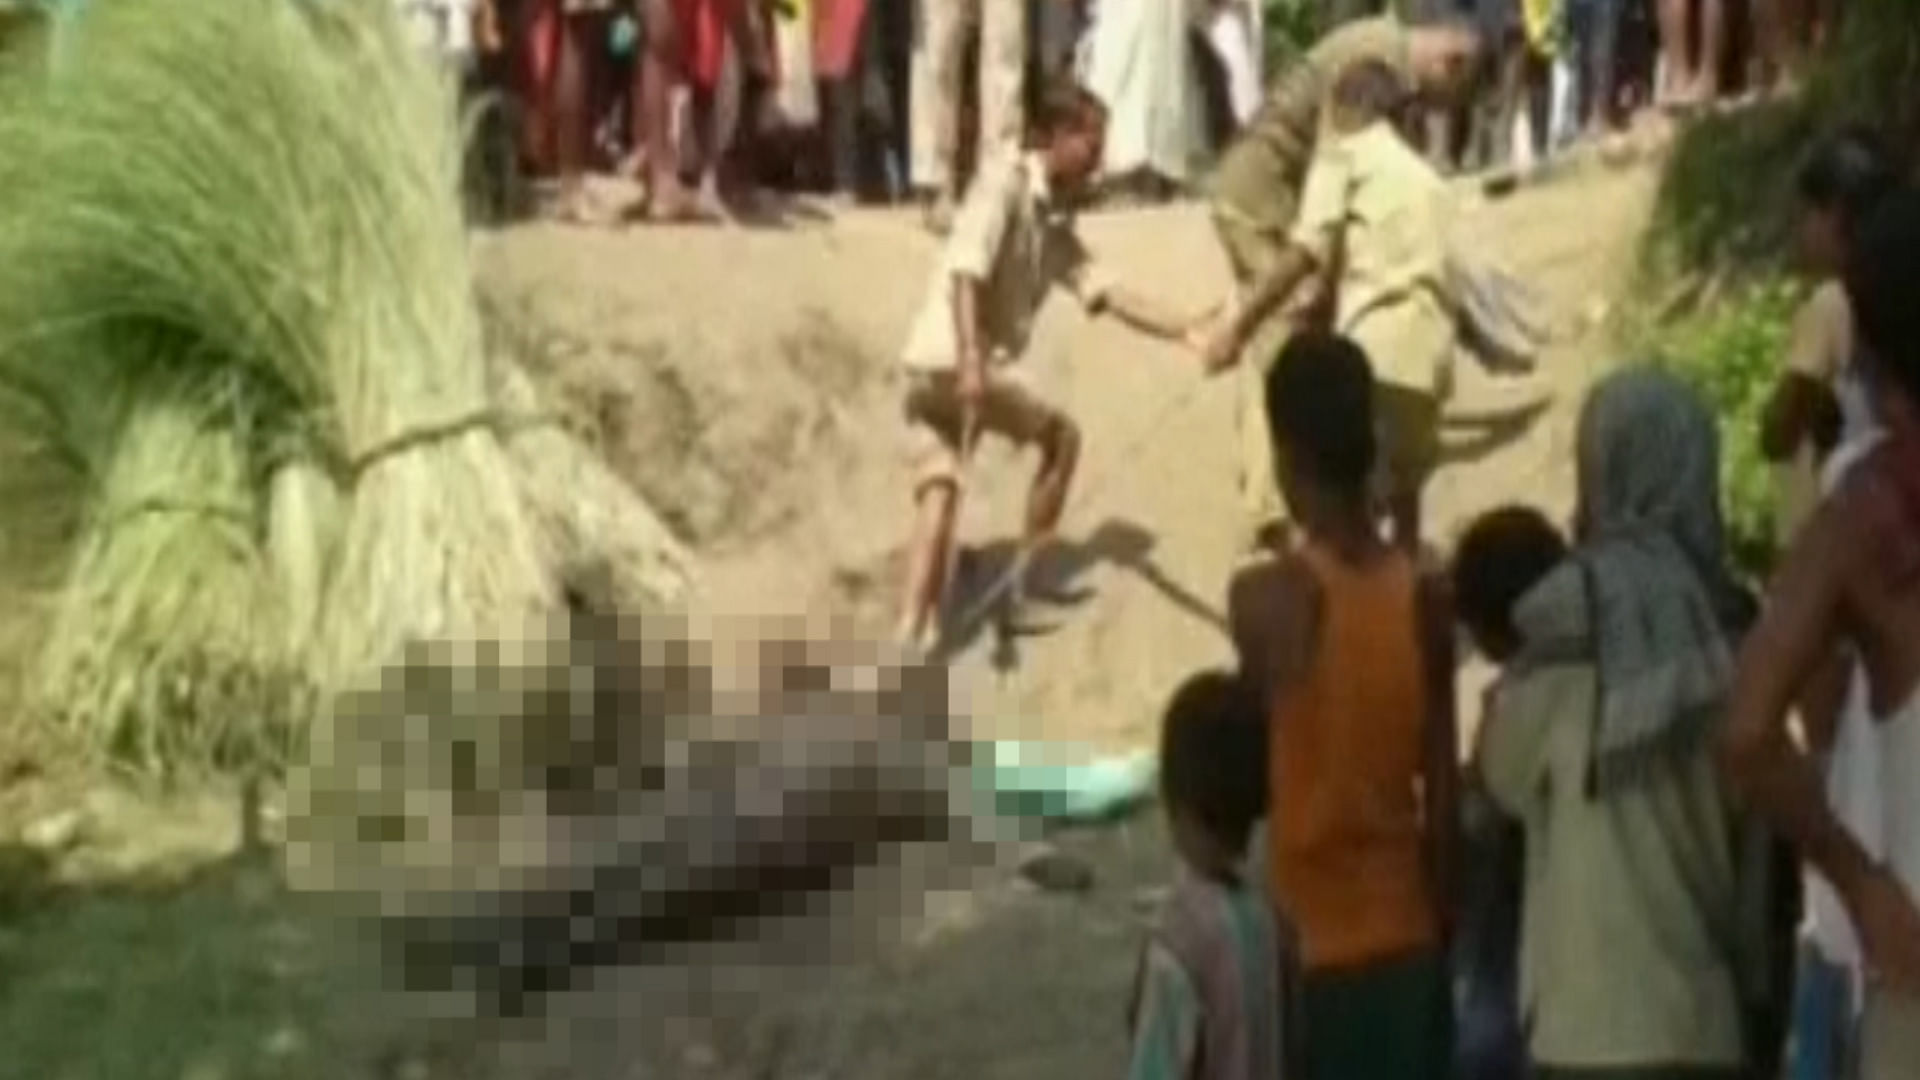 Police dragging out the corpse. (Photo: ANI Screengrab)